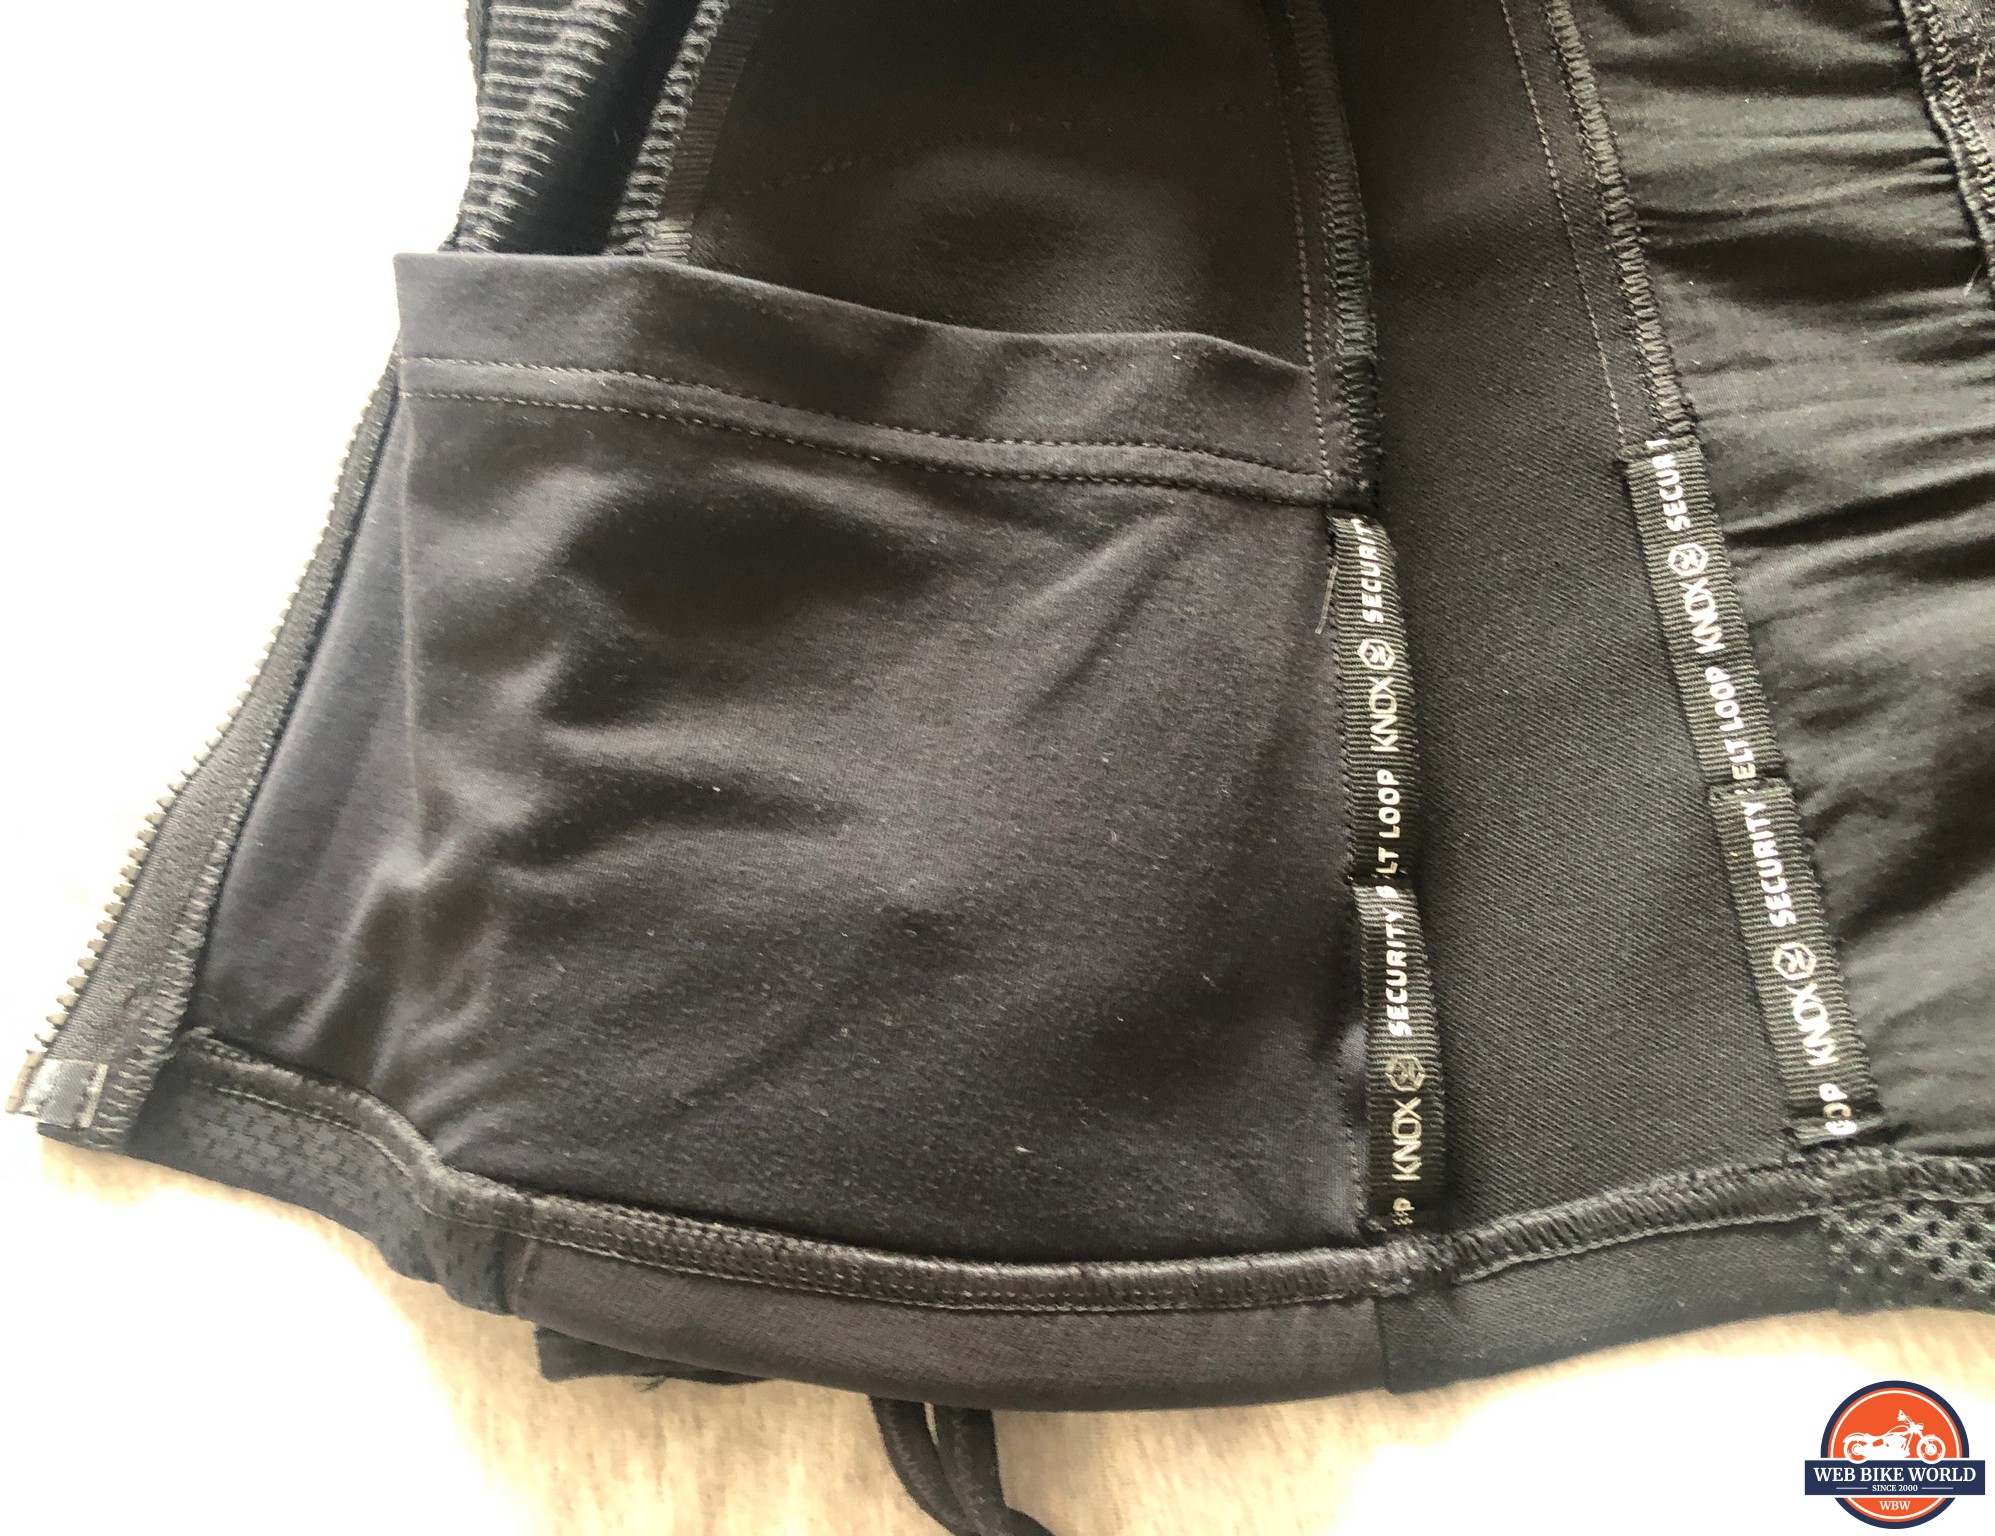 Closeup of the interior pocket which does not have zippers